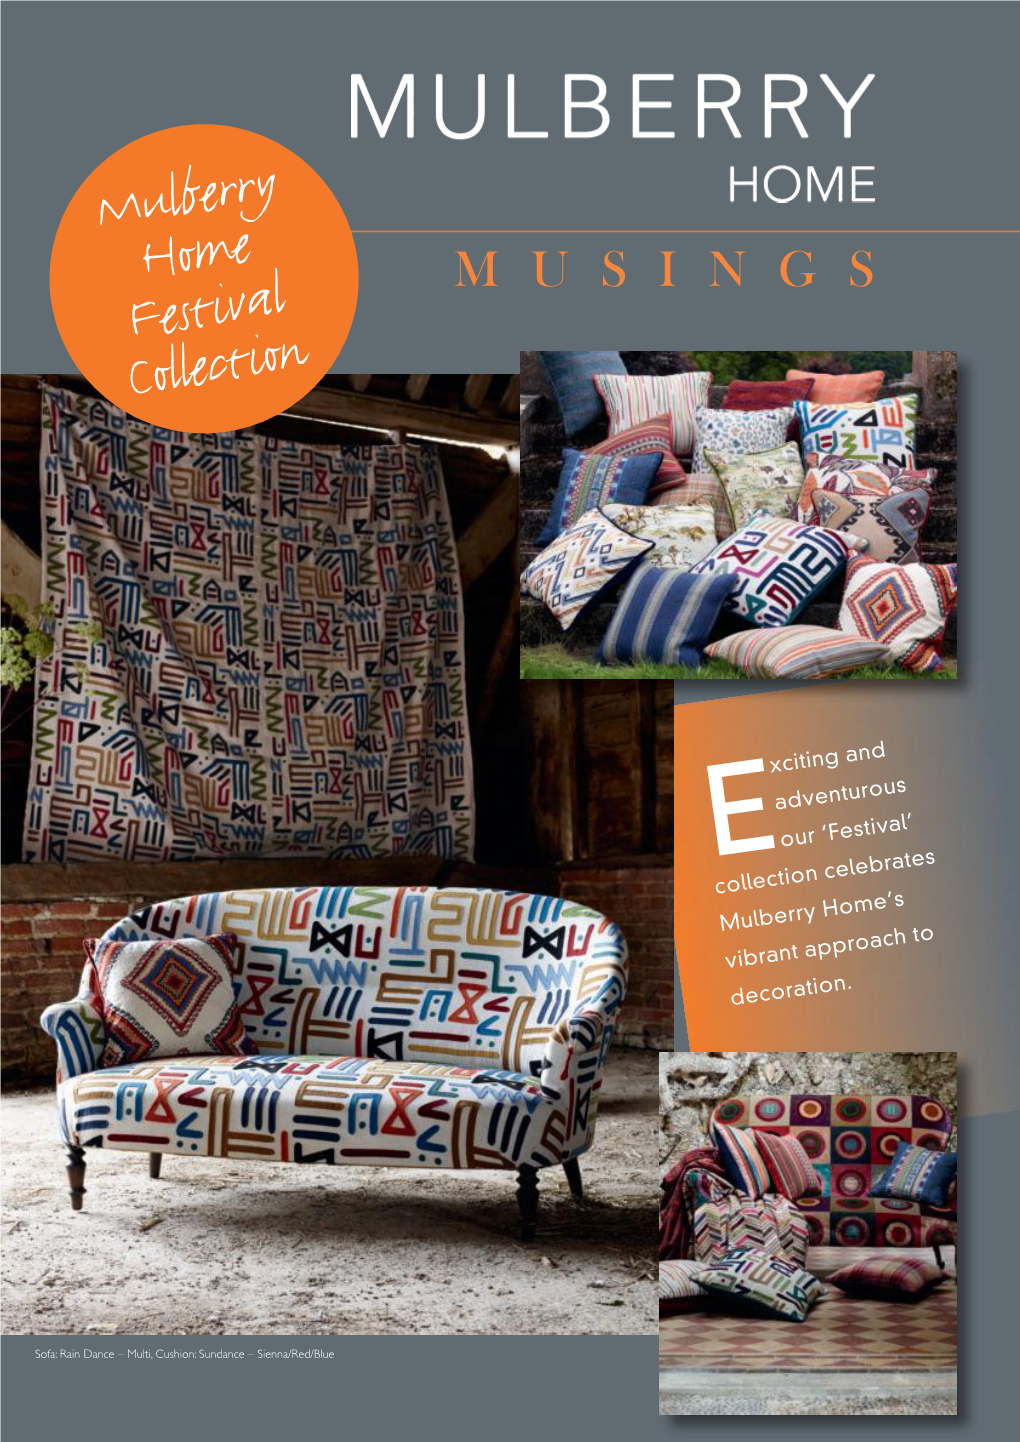 Mulberry Home Festival Collection